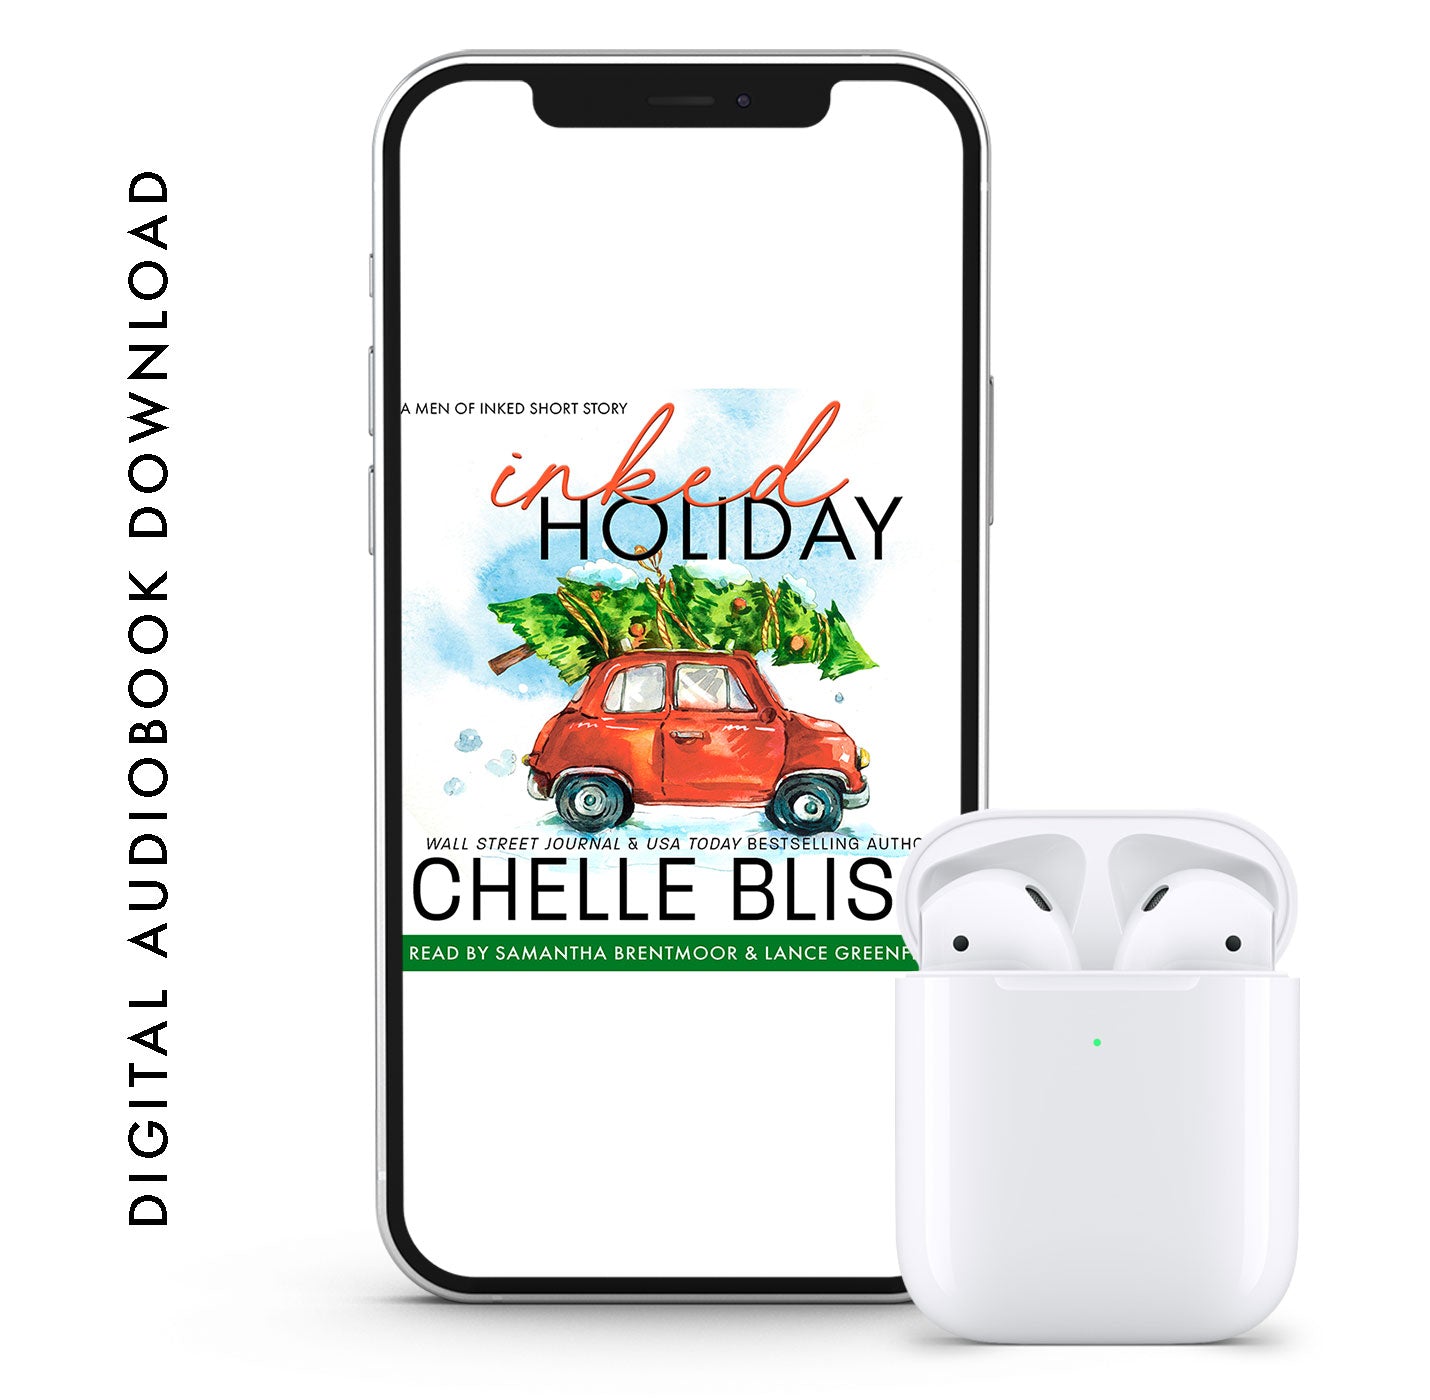 inked holiday audiobook by chelle bliss red car with christmas tree on roof 